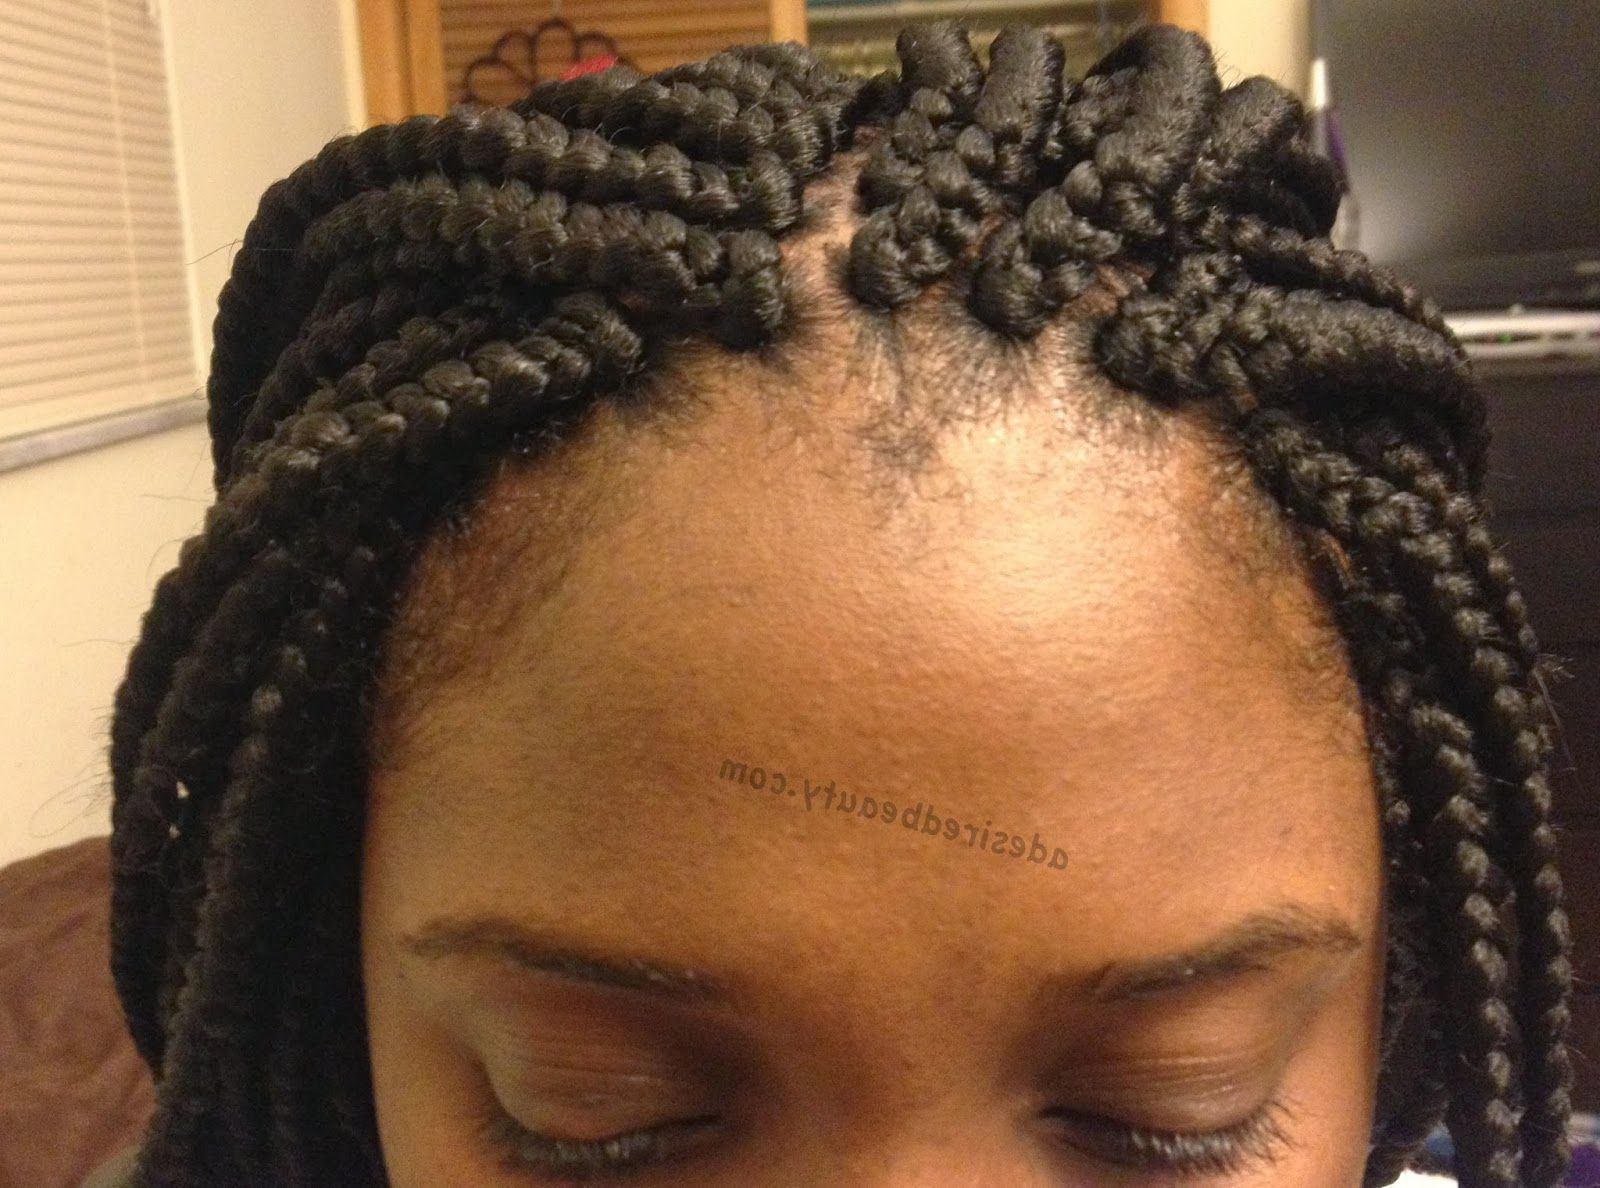 [%popular Dookie Braid Bump Hairstyles With My [traumatic] Box Braid Installation | A Desired Beauty|my [traumatic] Box Braid Installation | A Desired Beauty Within Most Up To Date Dookie Braid Bump Hairstyles%] (View 11 of 20)